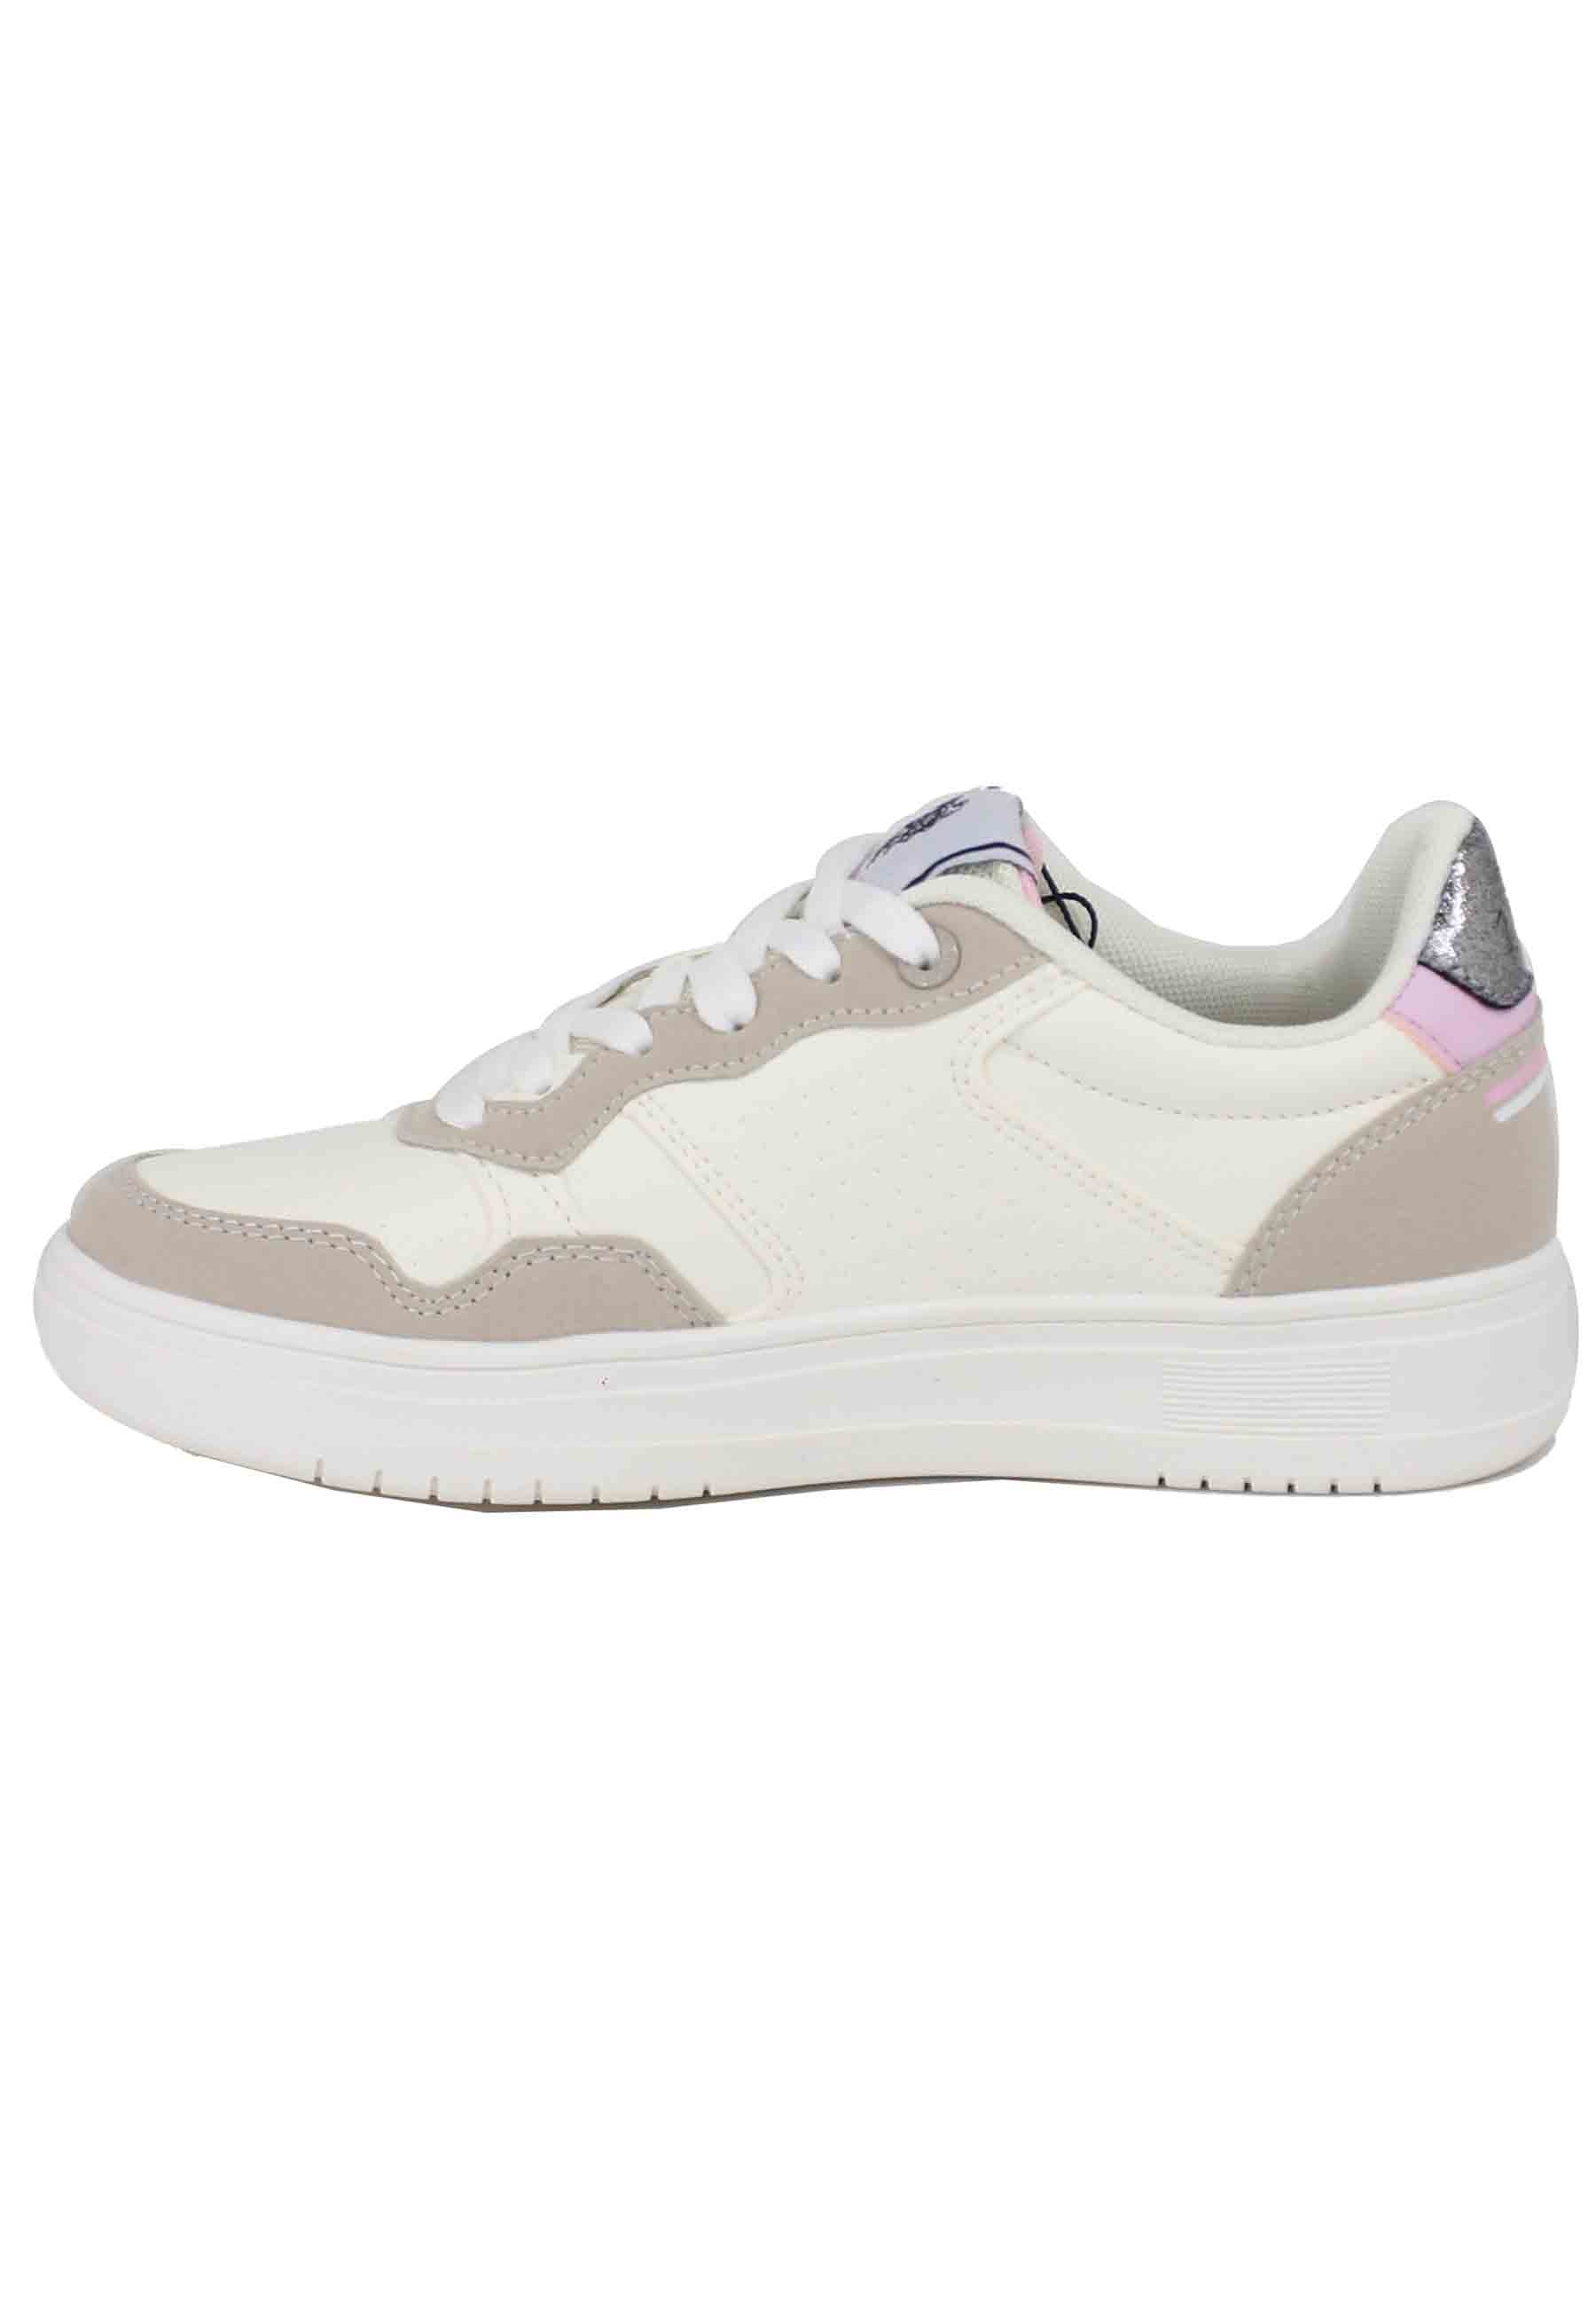 Sneakers donna in eco pelle vintage bianco e nude